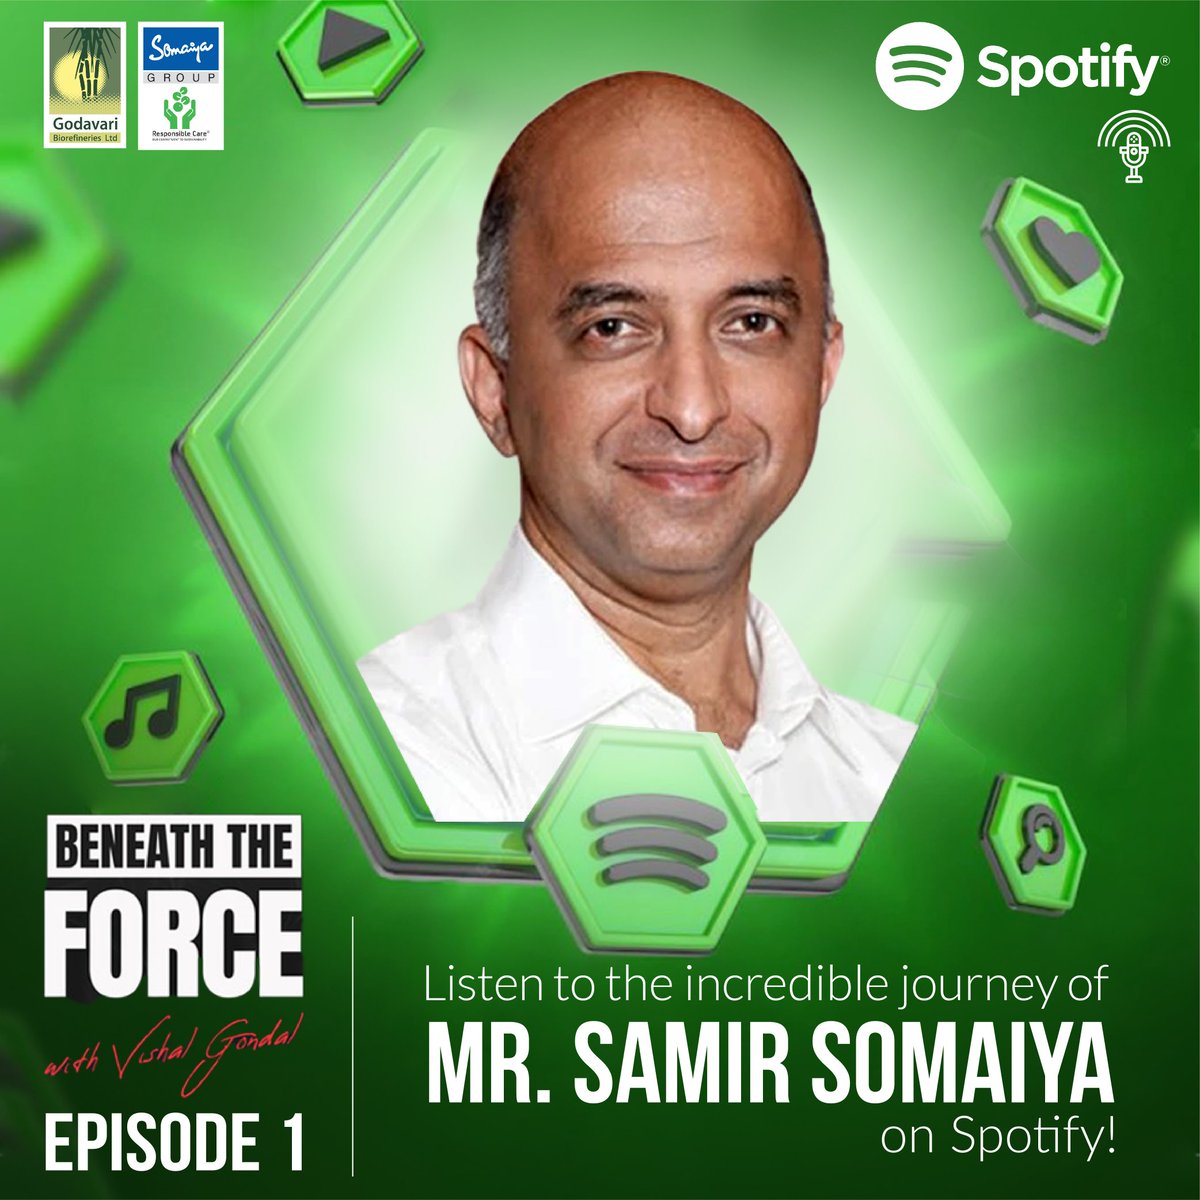 Catch Mr. Samir Somaiya, Chairman & Managing Director - Godavari Biorefineries Limited in an exclusive podcast with Vishal Gondal on Beneath the Force: The Vishal Gondal Show available on Spotify!
Link: shorturl.at/gK789
#GodavariBiorefineriesLimited #BeneathTheForce